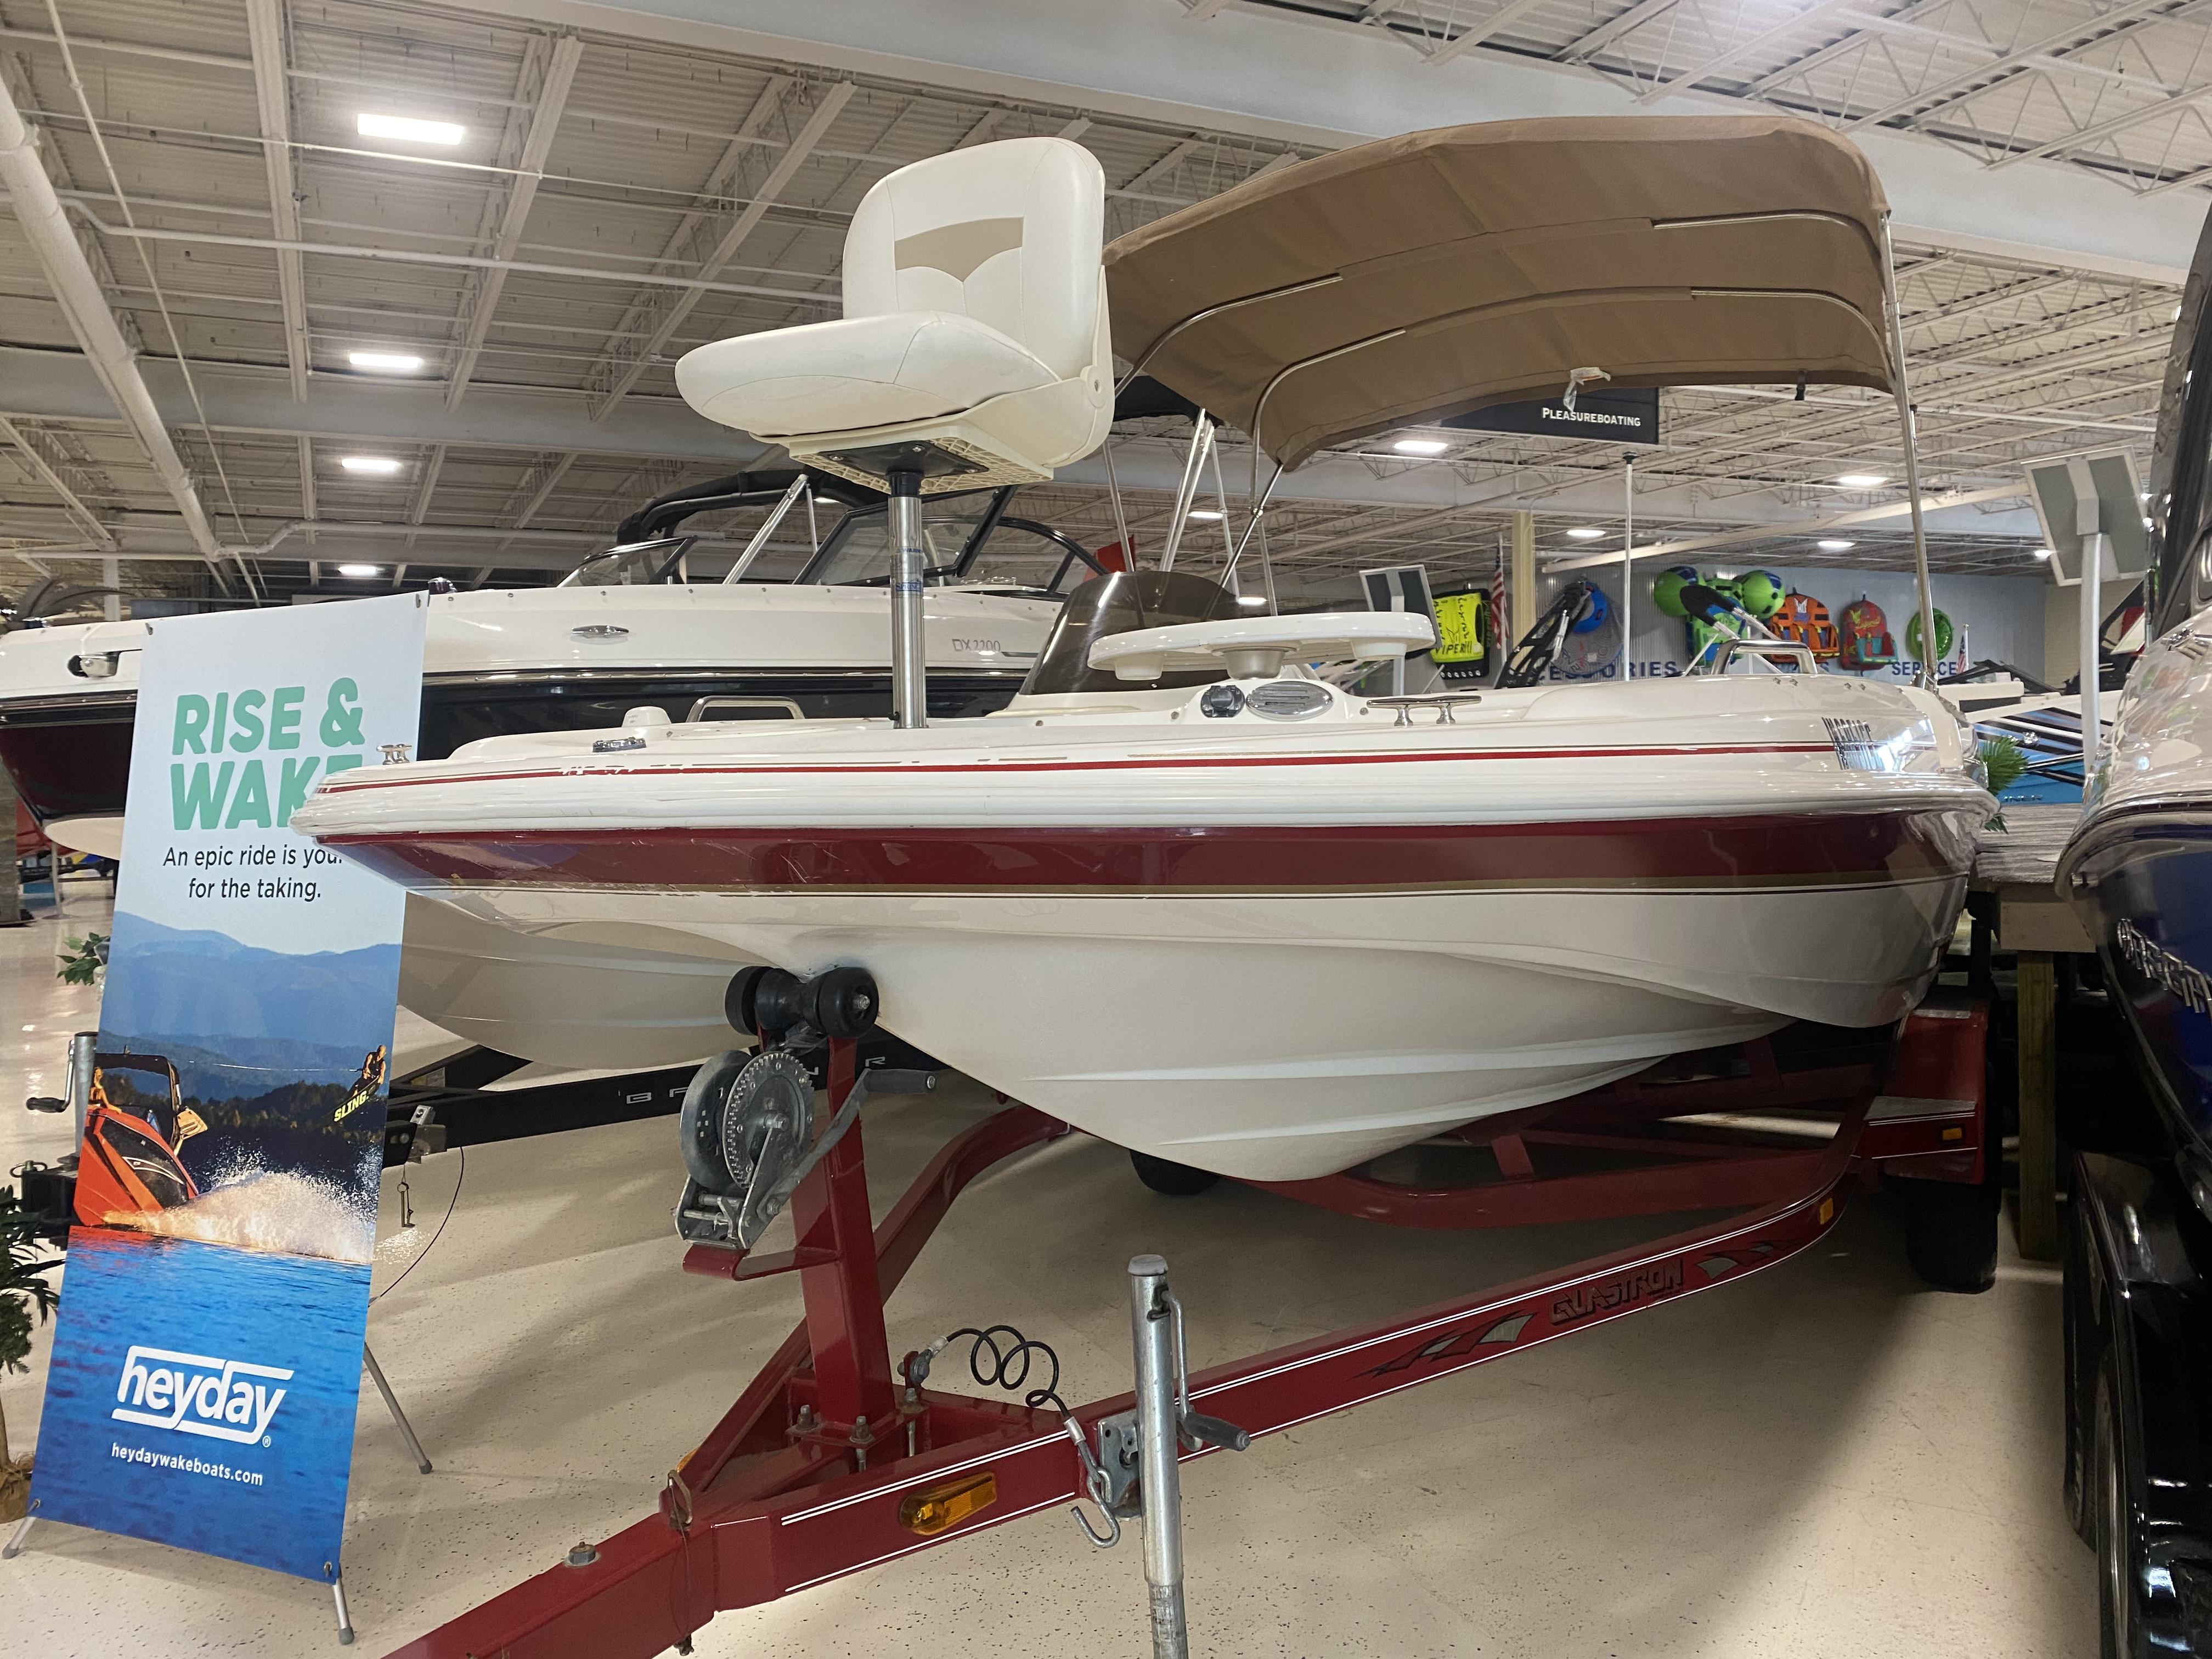 1974 glastron v156 tri-hull roundabout for Sale in Minneapolis, MN